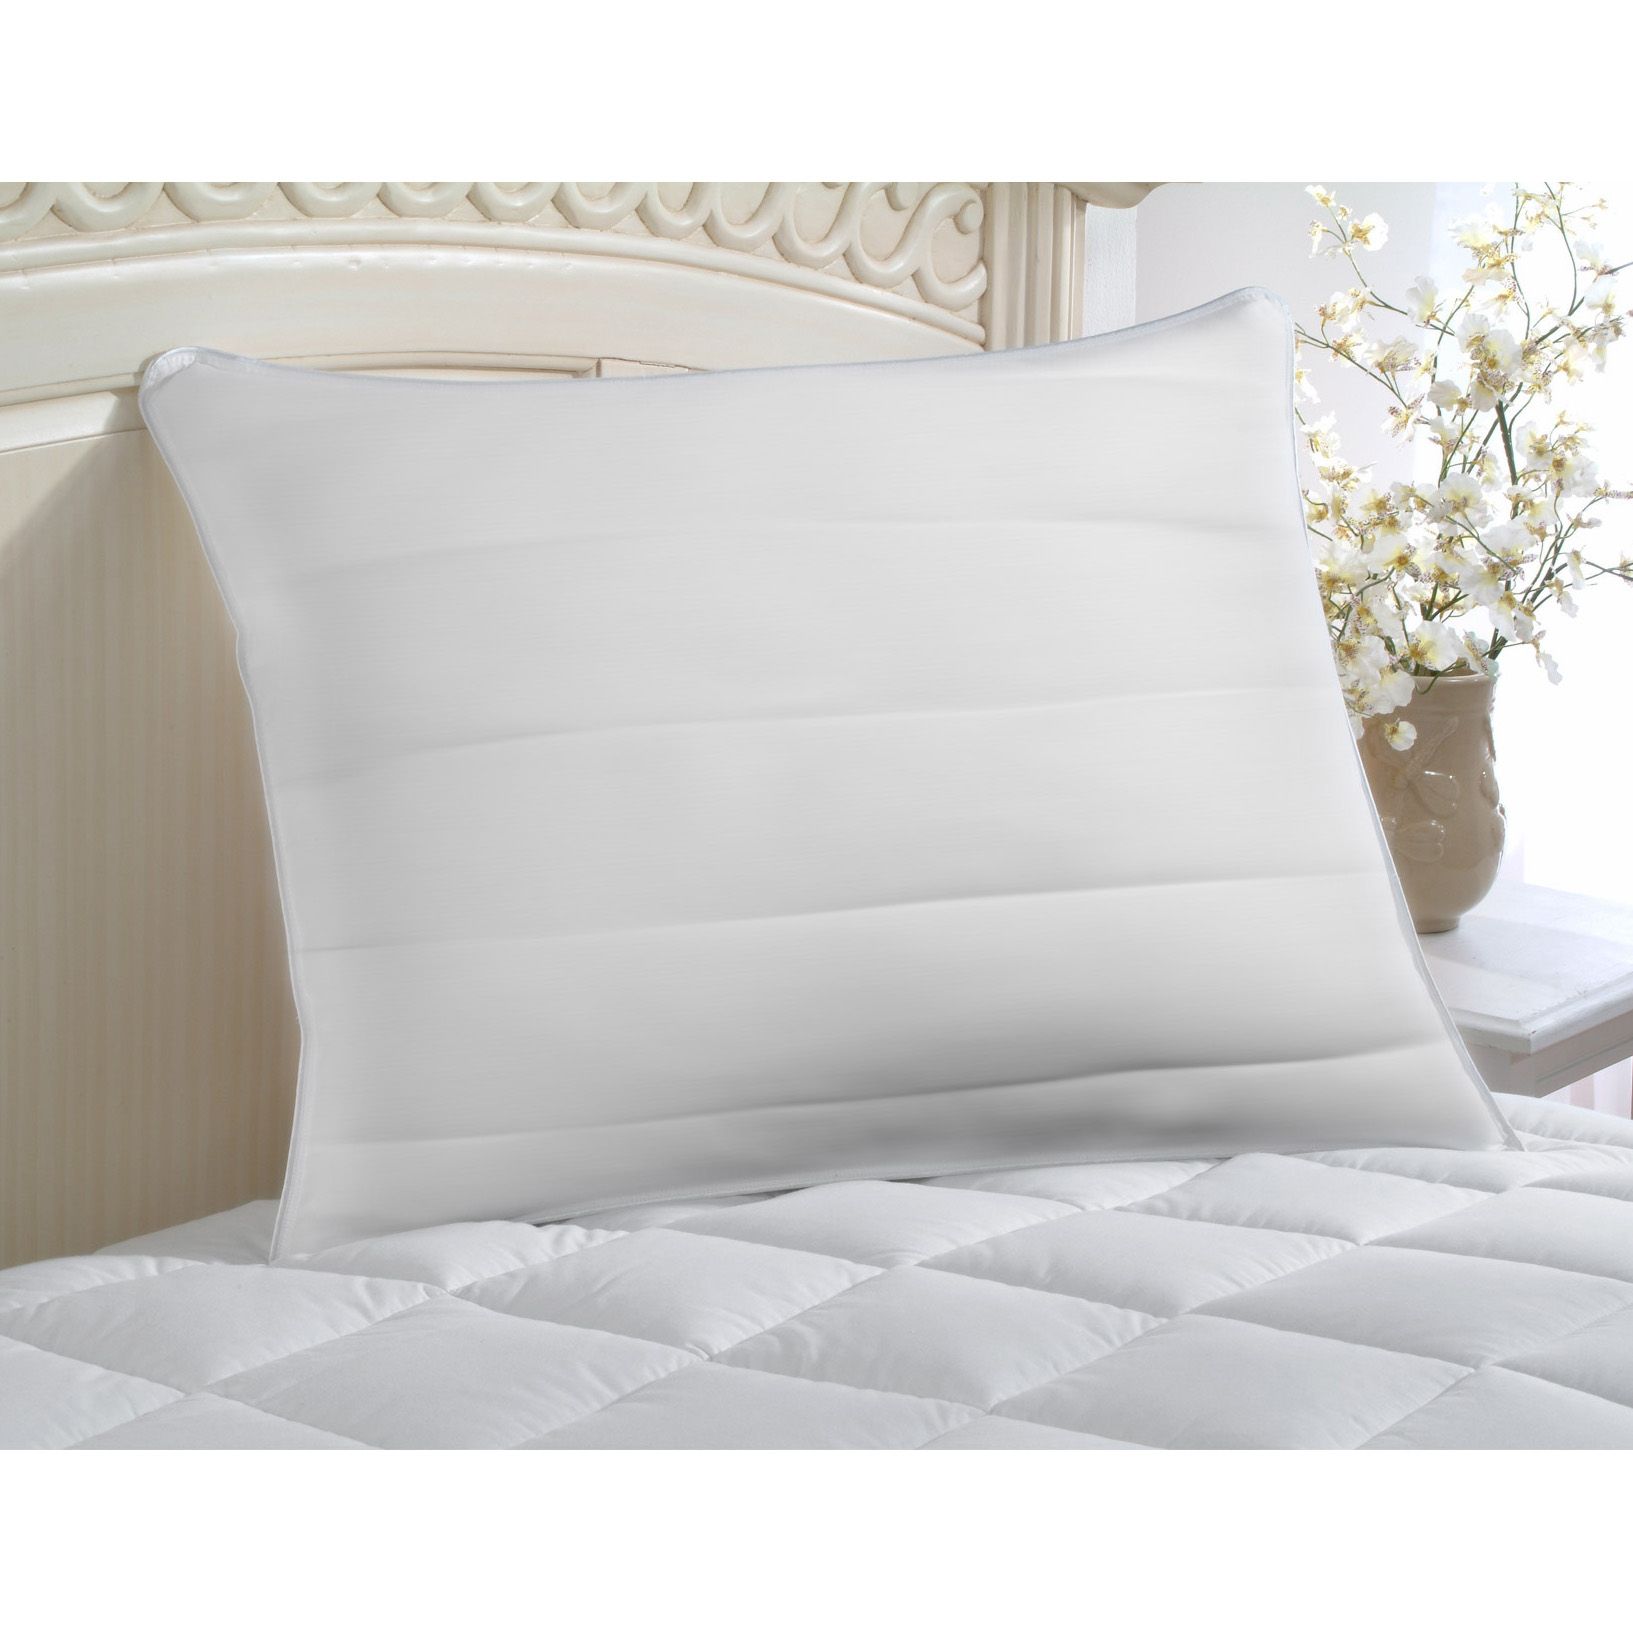 OOdles 300 Thread Count Pillow